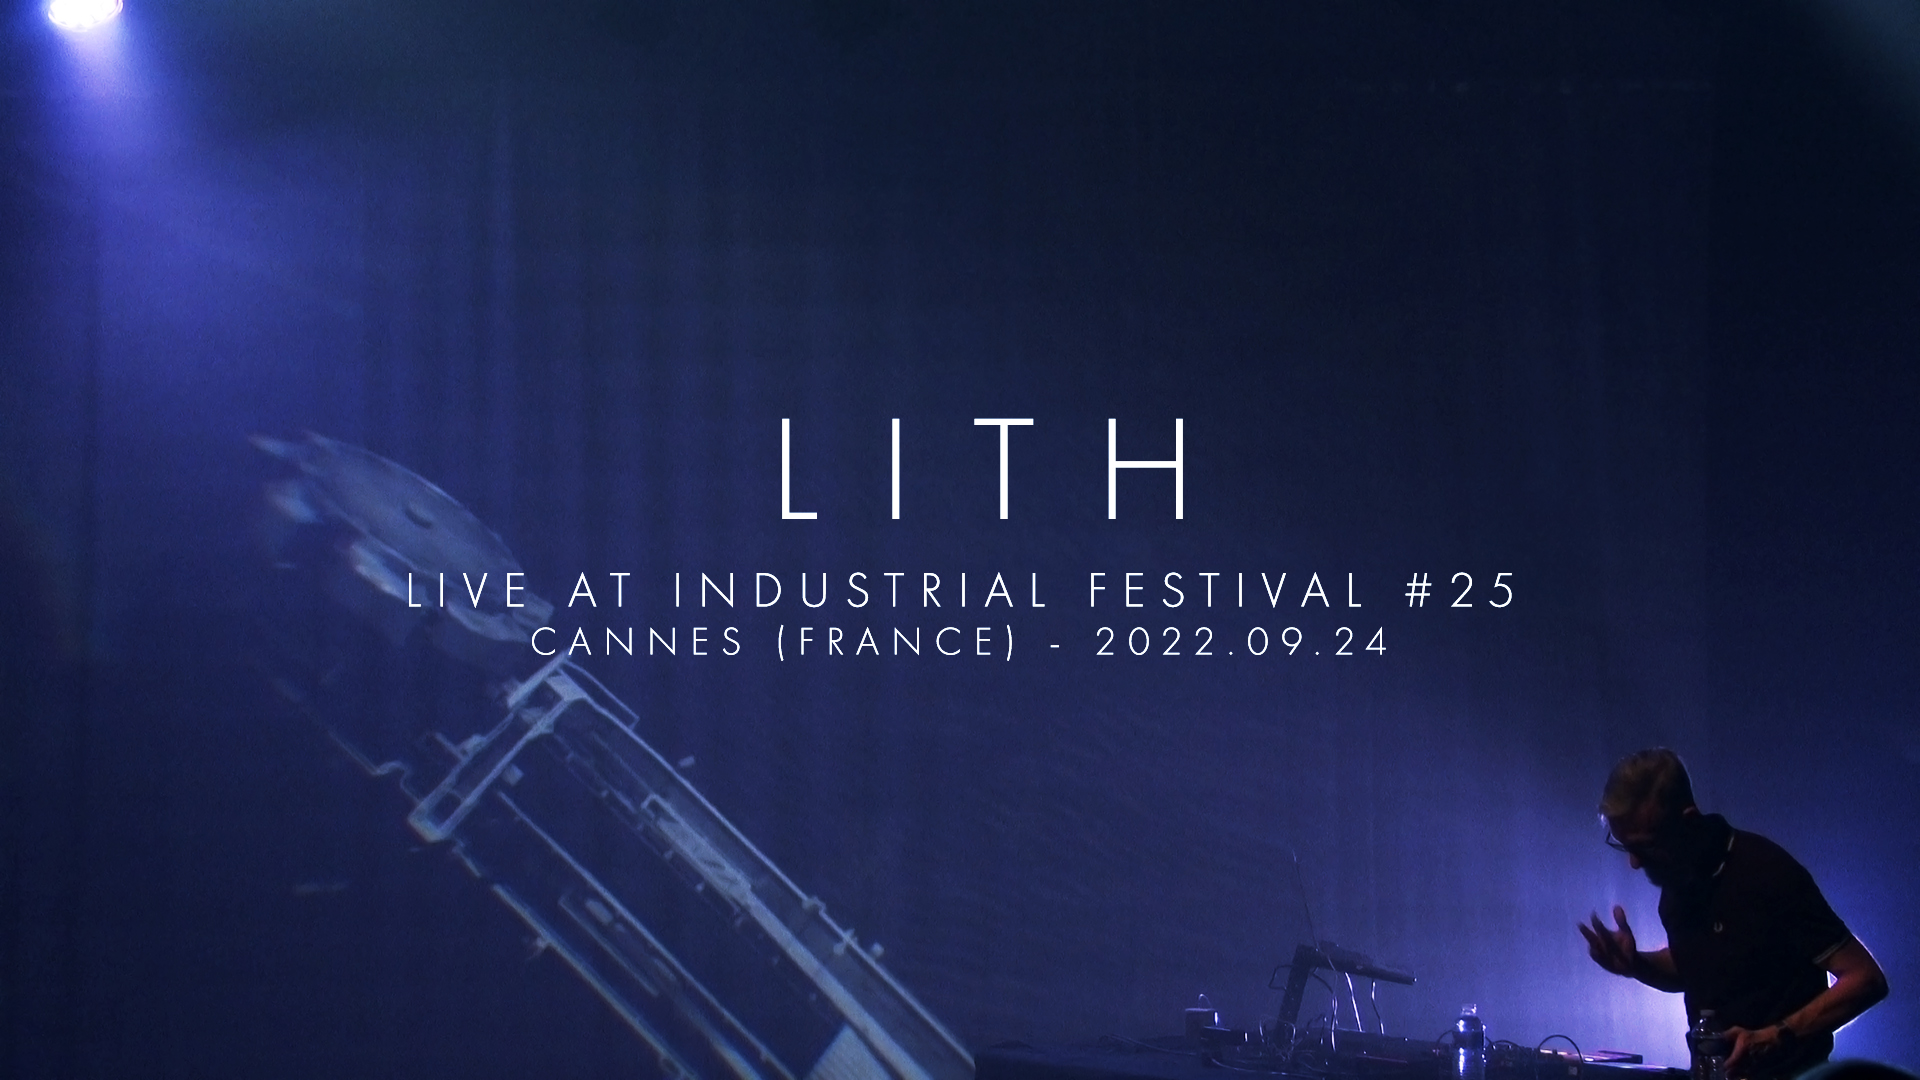 LITH Live at Industrial Festival #25